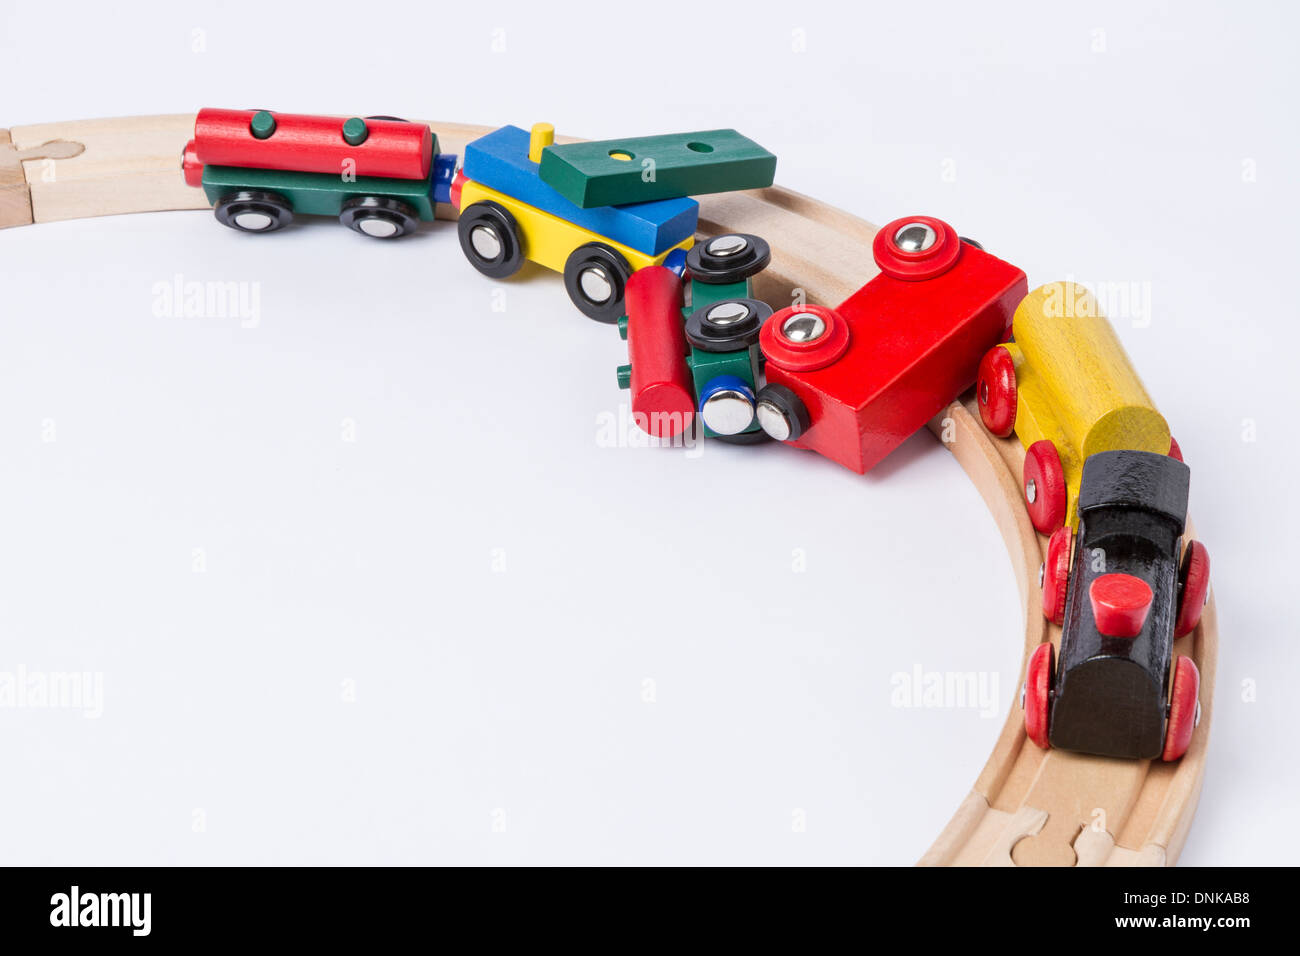 derail wooden toy train in top view. horizontal image Stock Photo